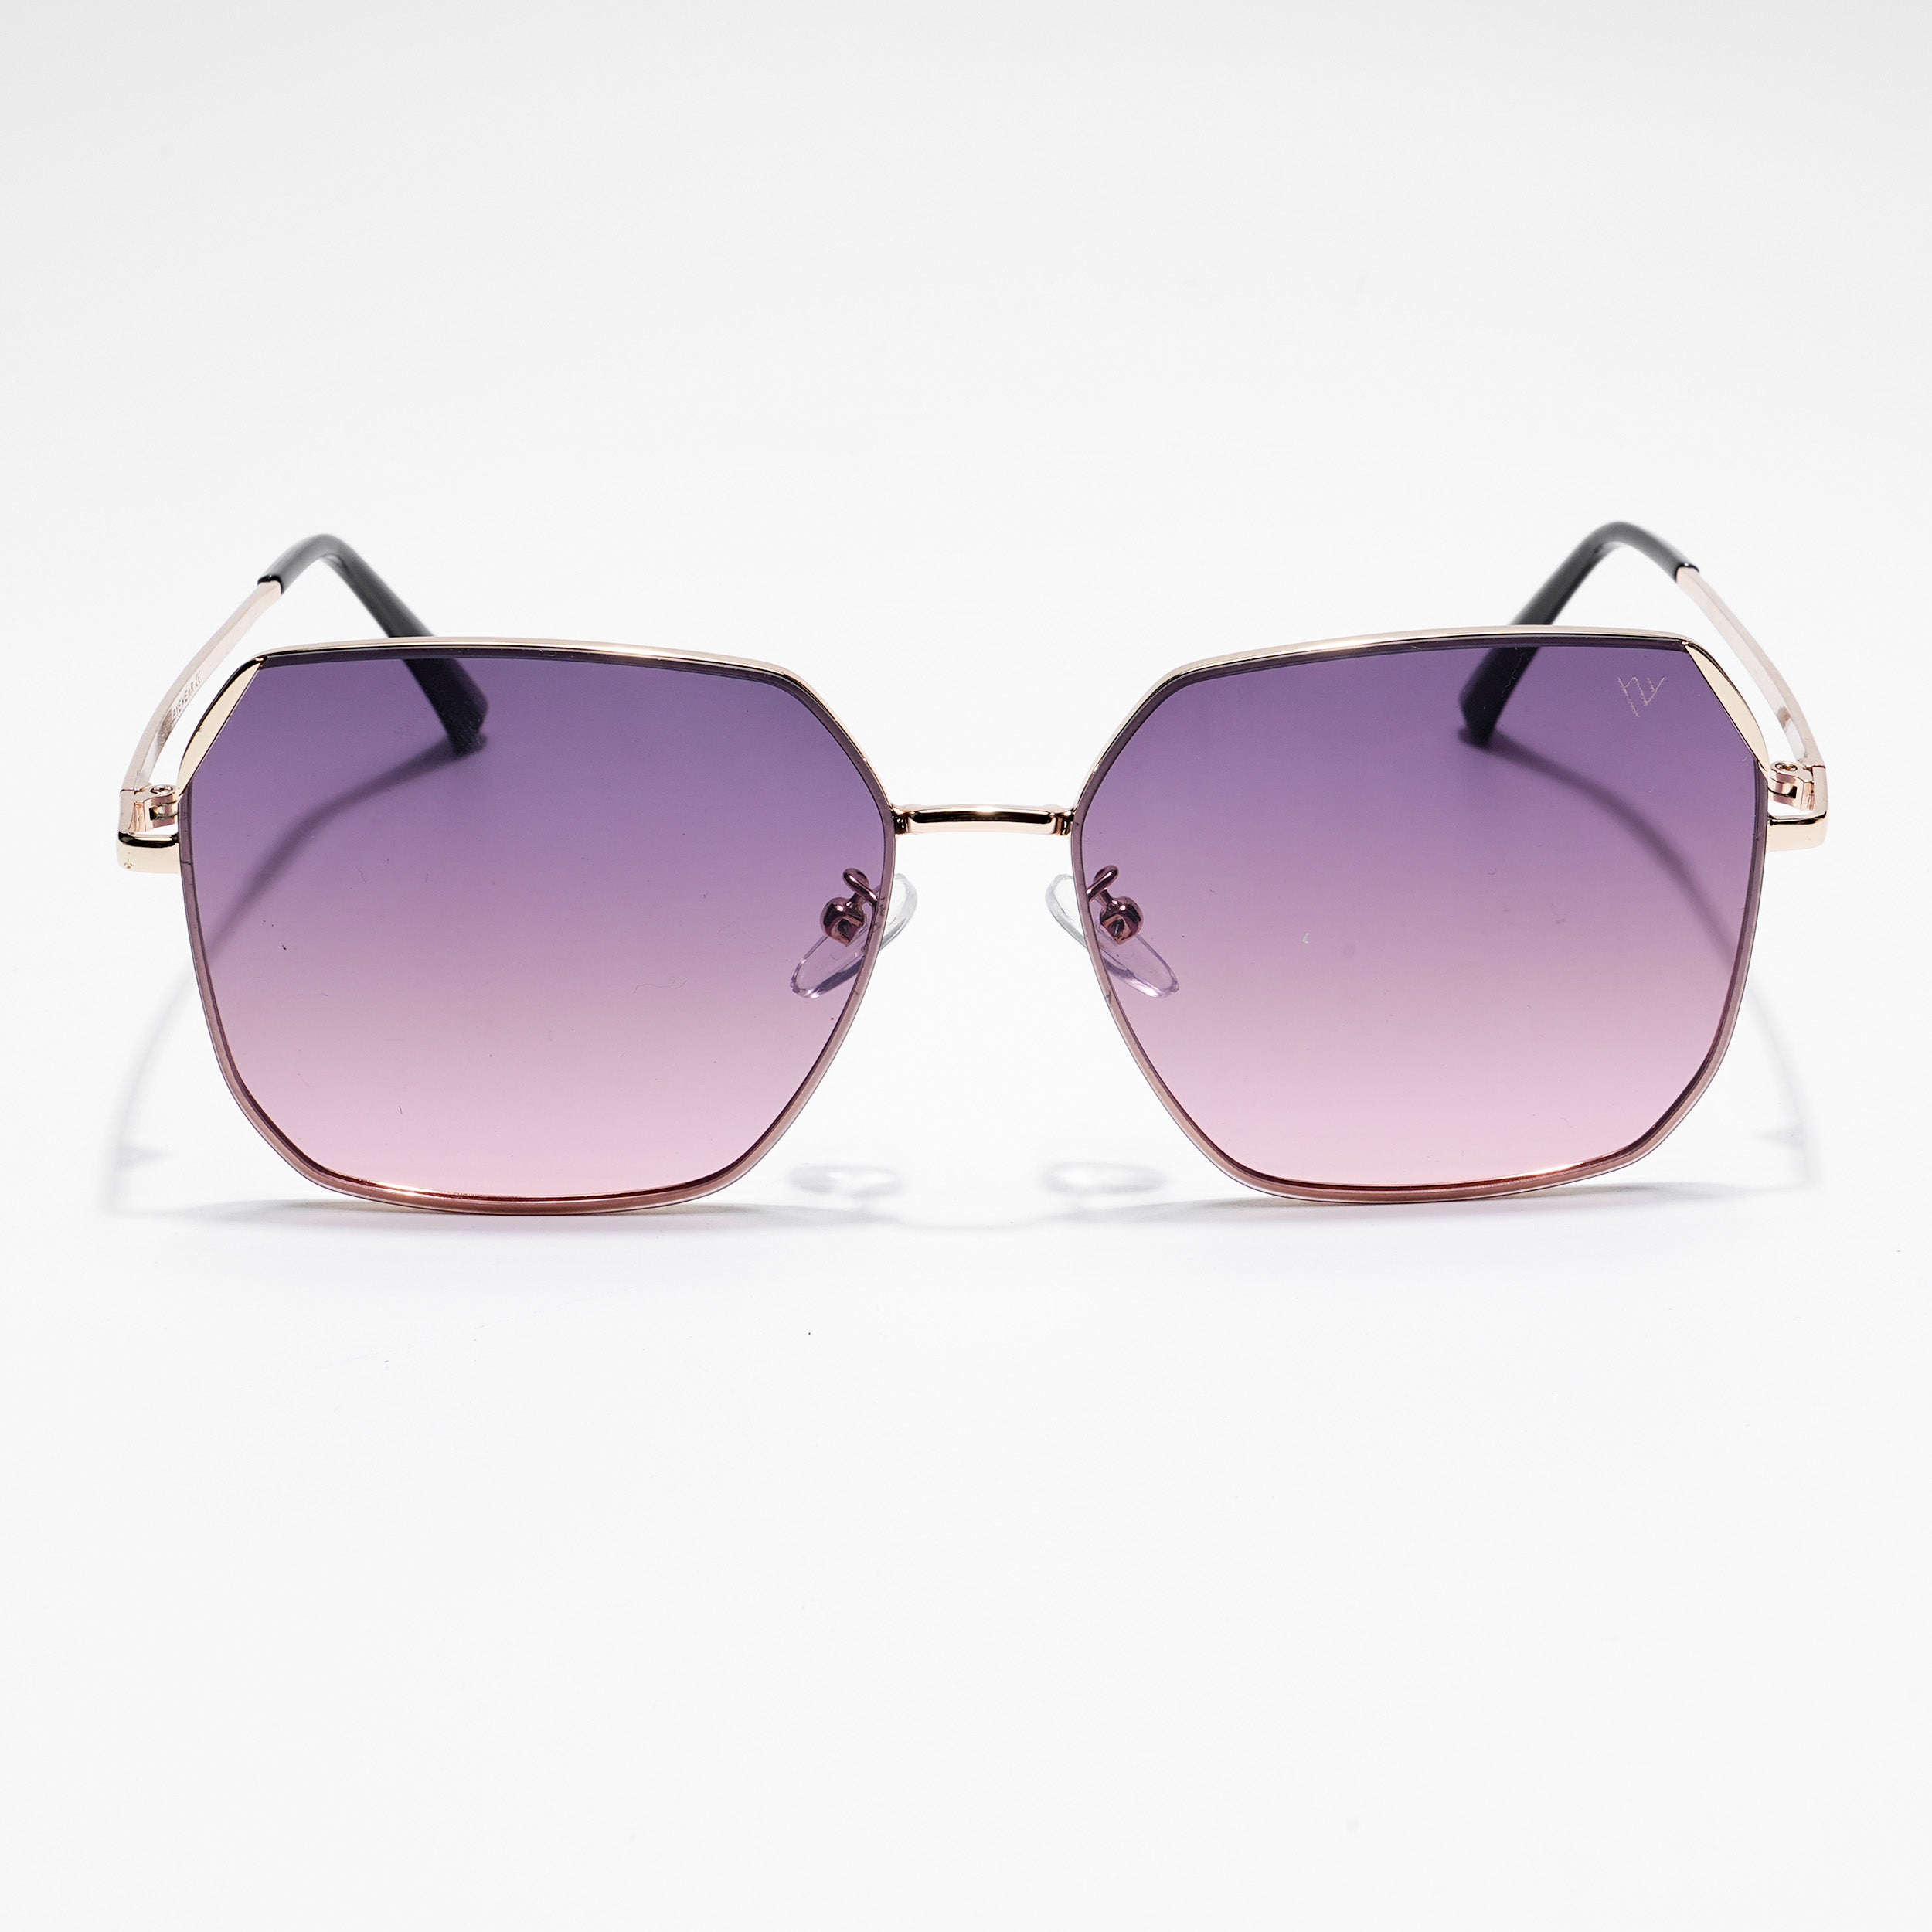 Voyage Grey & Pink Square Sunglasses for Men & Women (450MG4341)